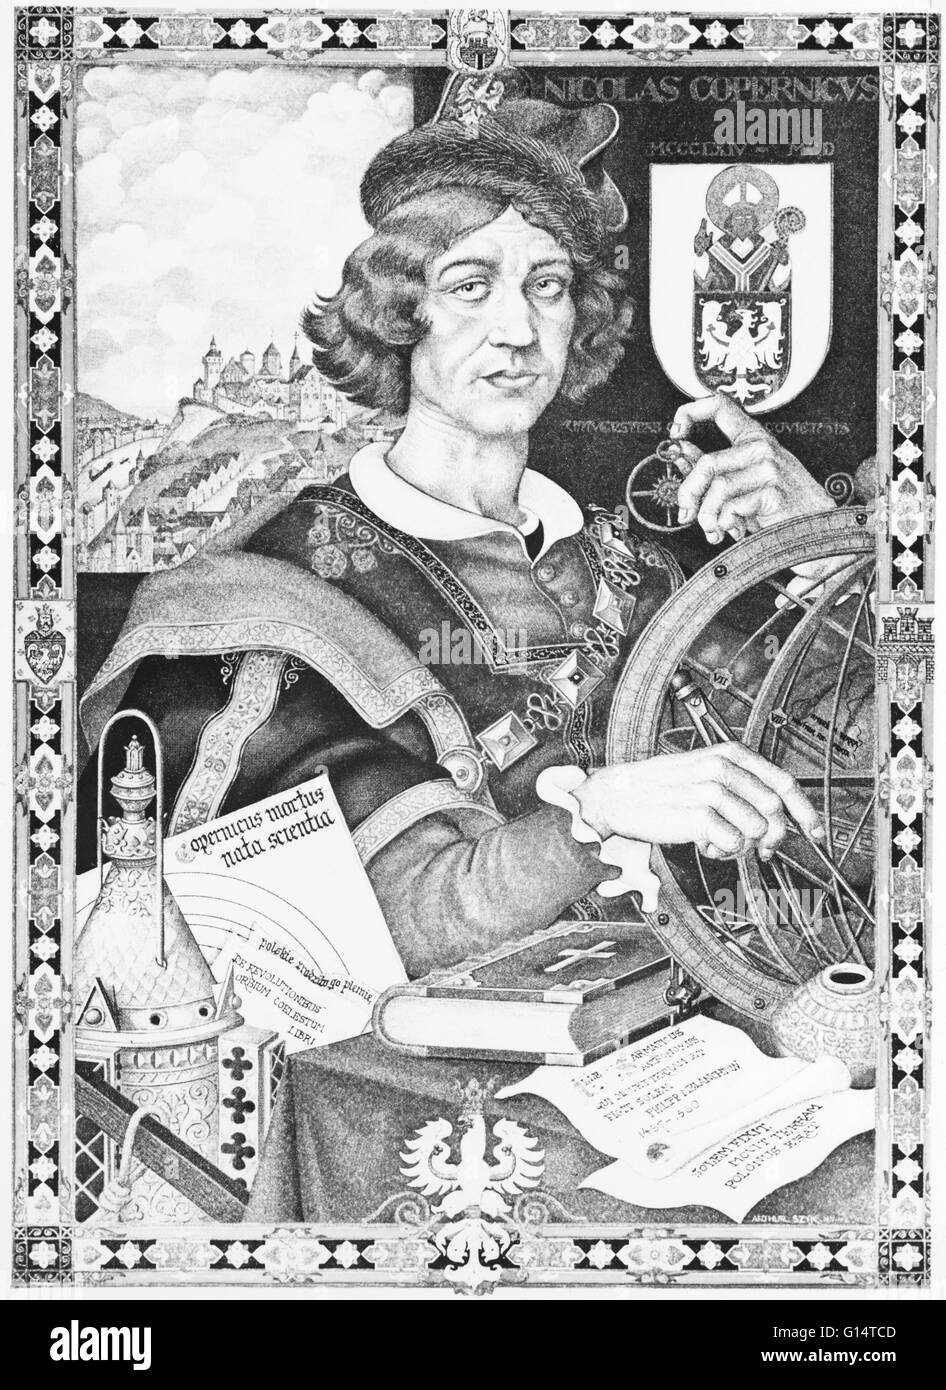 Nicolaus Copernicus (February 19, 1473 - May 24, 1543) was a Polish Renaissance mathematician and astronomer, of a Prussian descent, who formulated a model of the universe that placed the Sun rather than the Earth at the center of the universe. This syste Stock Photo